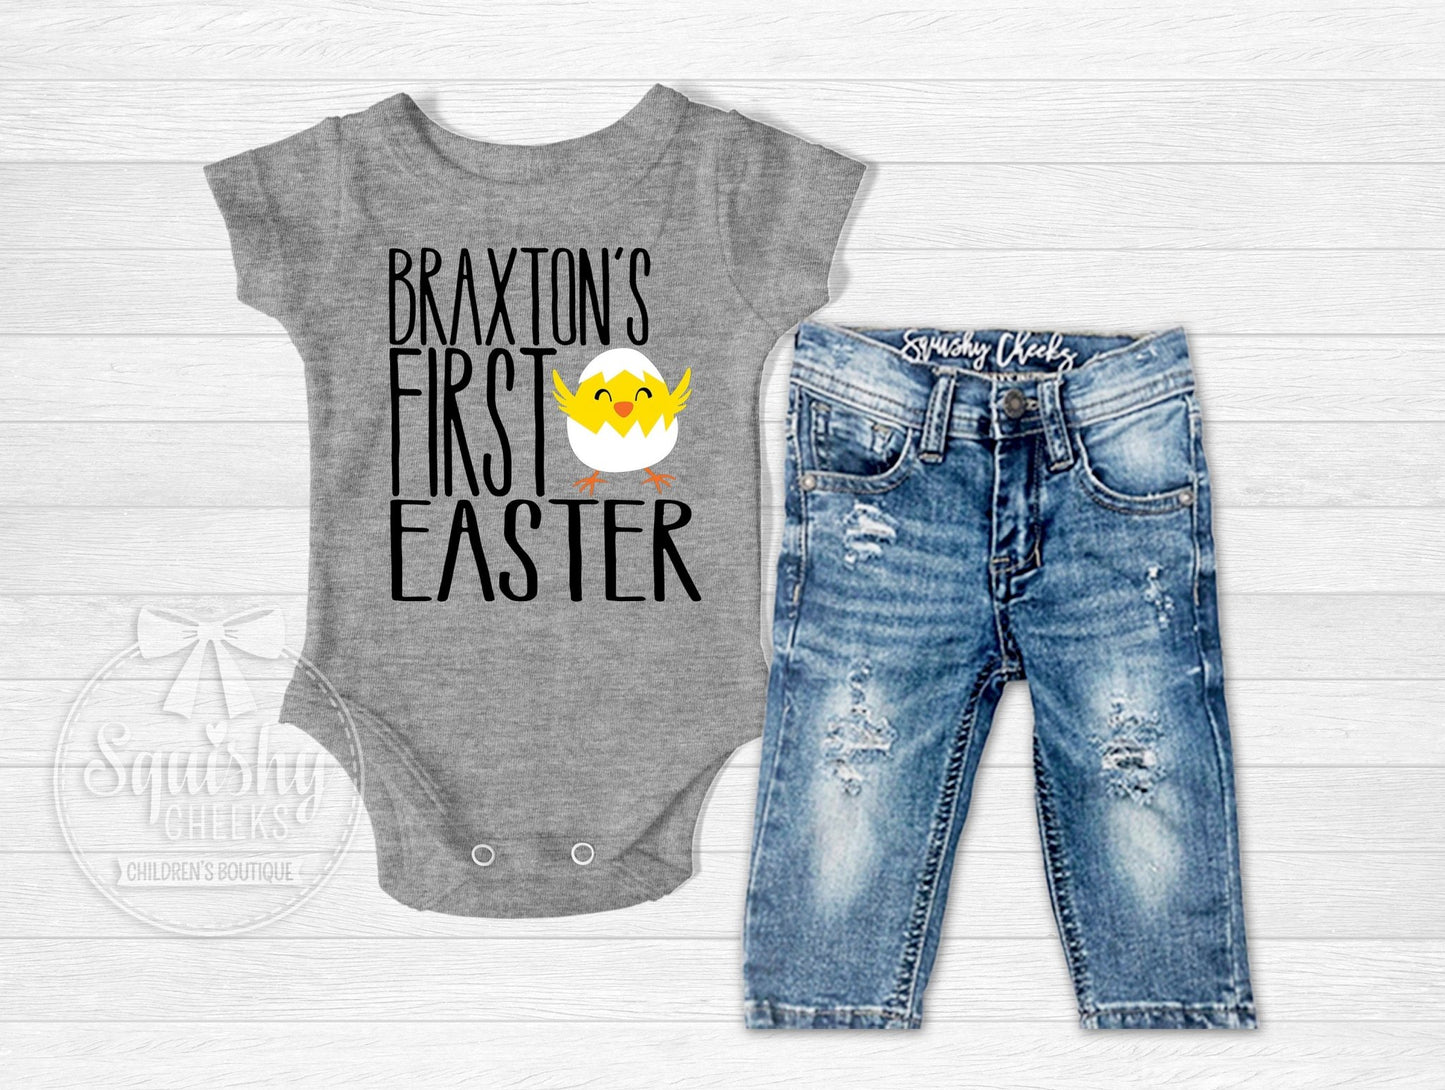 Boy 1st Easter Shirt, Boy's First Easter, Baby Boy Easter Outfit, Personalized Easter Shirt, Boy's Personalized Bodysuit, Easter Shirt - Squishy Cheeks